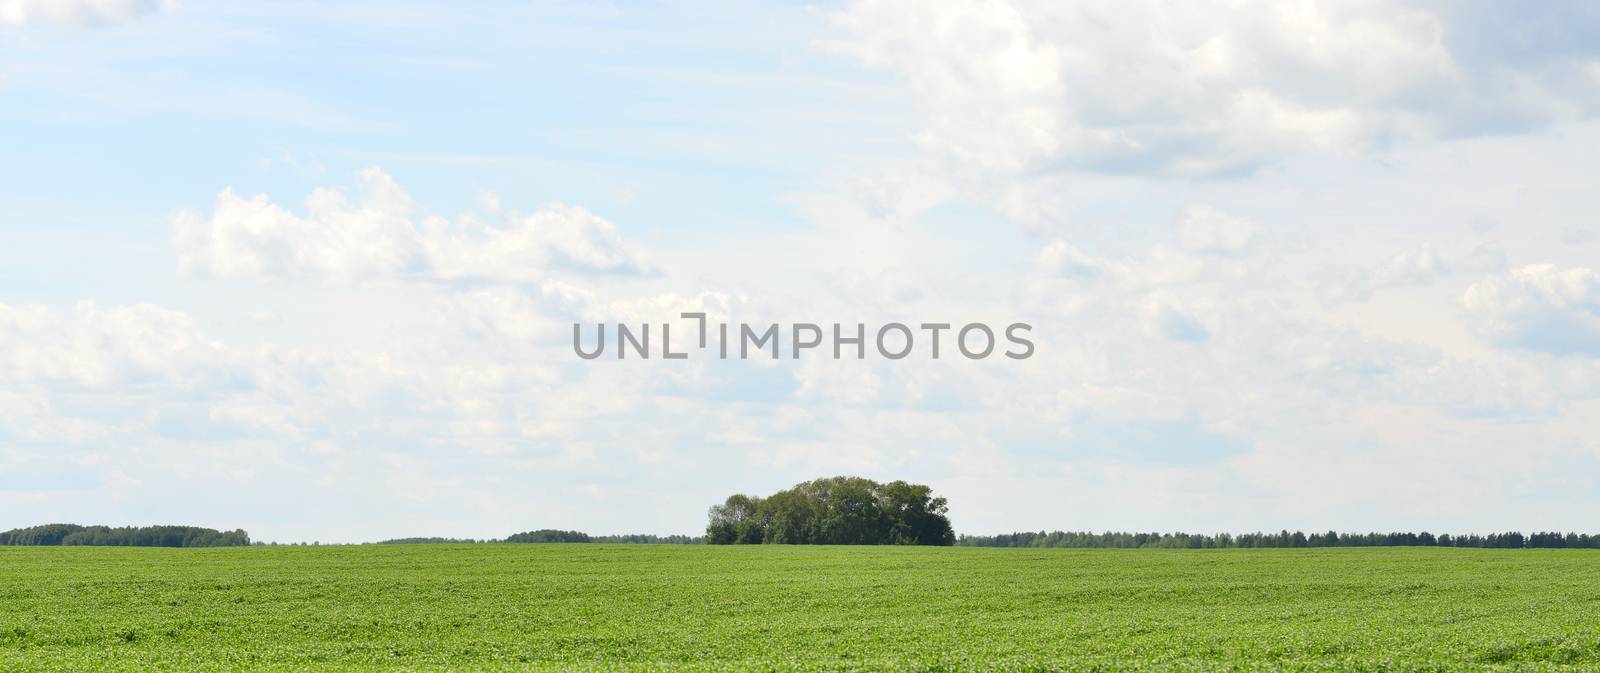 Green field on a background of the blue sky